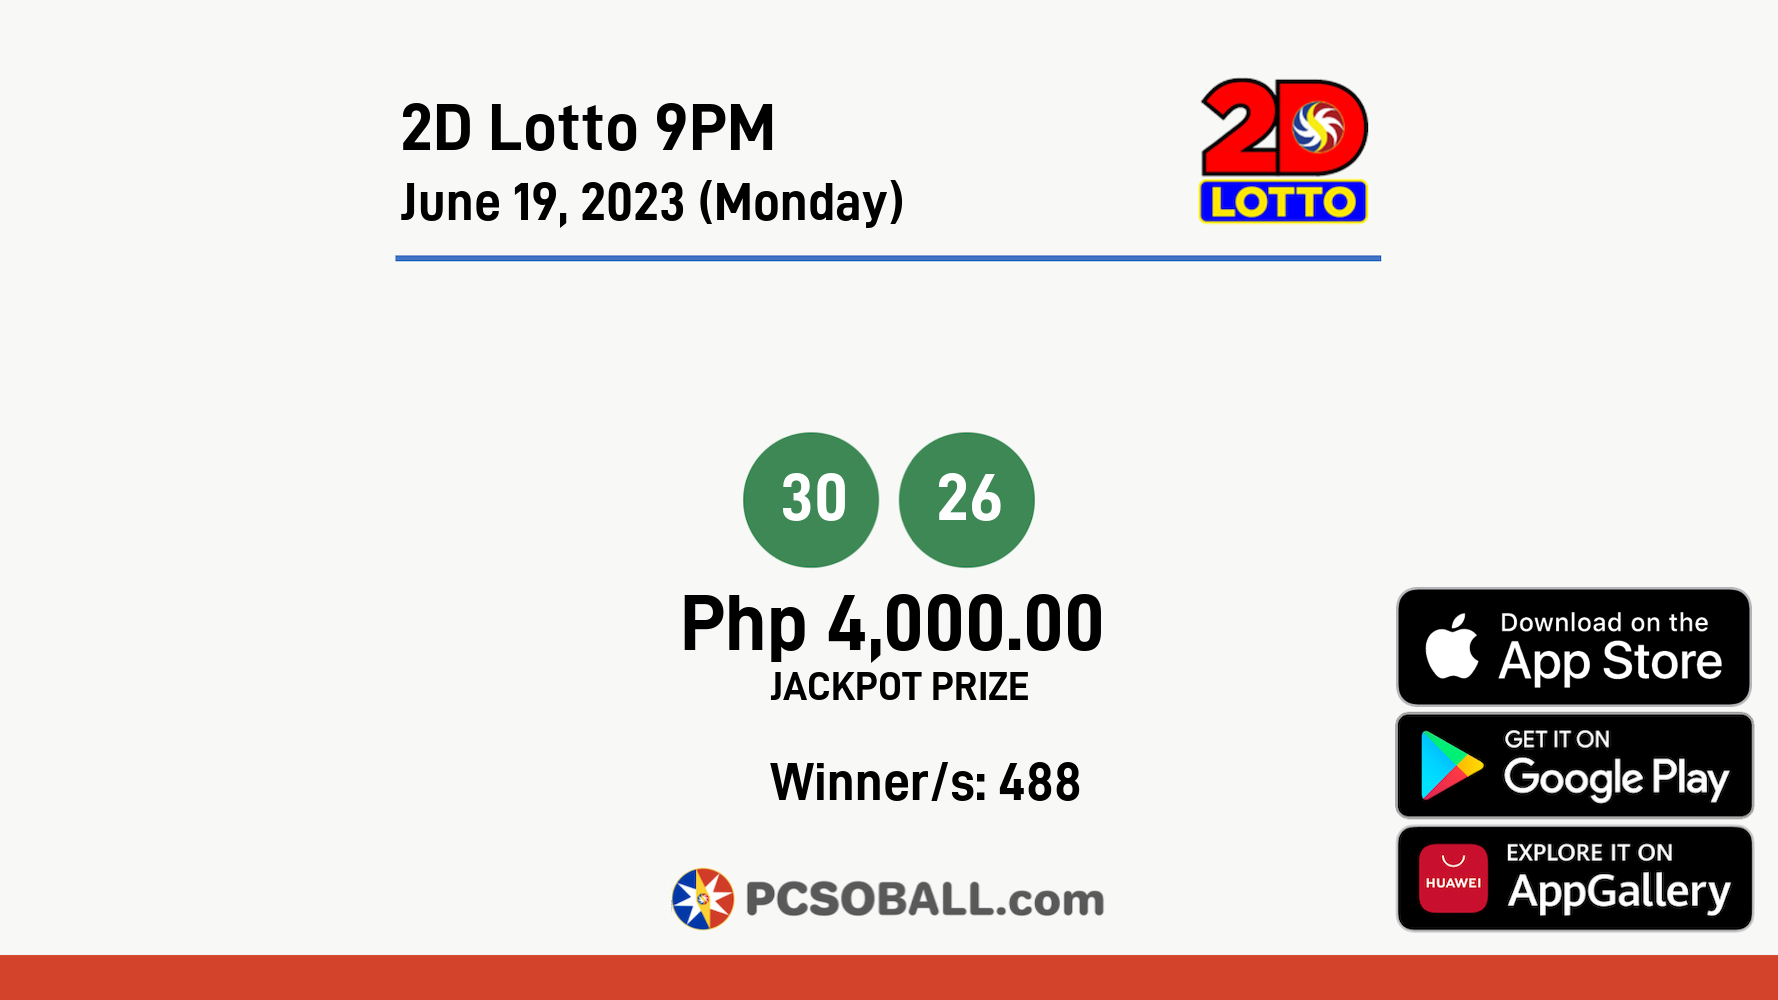 2D Lotto 9PM June 19, 2023 (Monday) Result